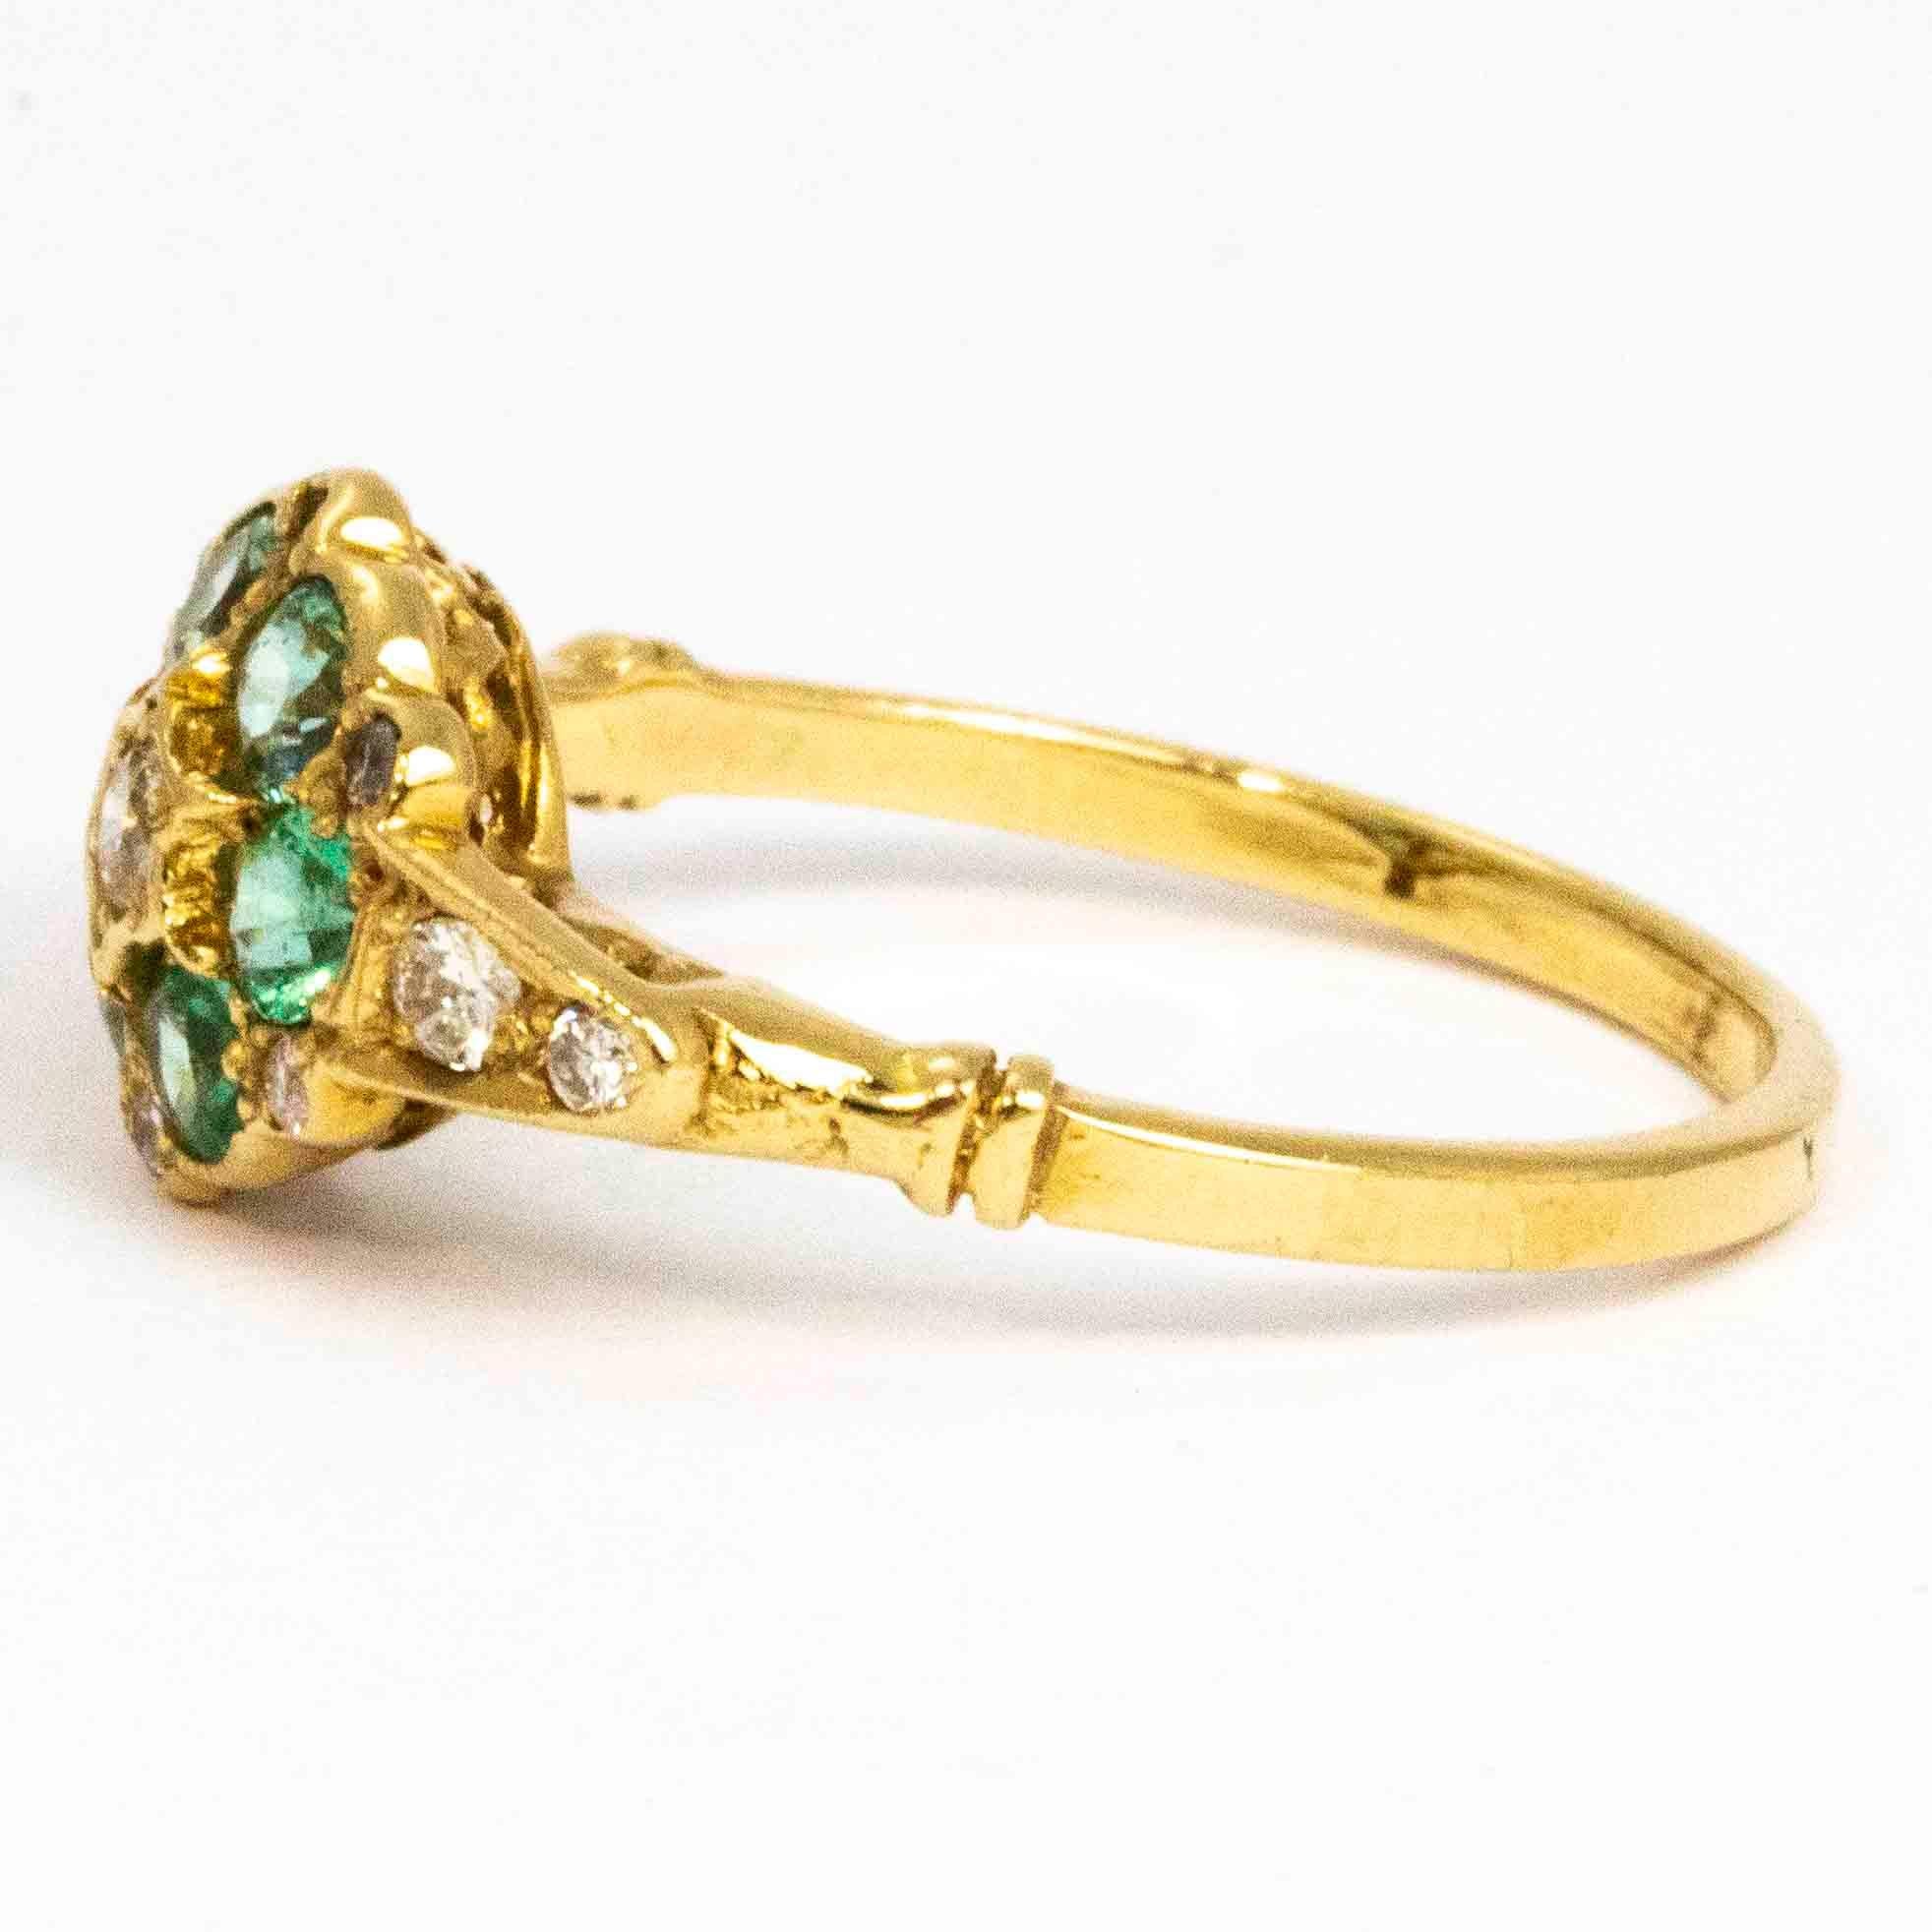 The glistening bright green emeralds in this ring are simply stunning. The cluster also hold sparkling diamonds and is modelled in ct gold. The centre diamond measures 9pts, the emeralds measure 10pts each and the shoulders hold diamonds measuring a